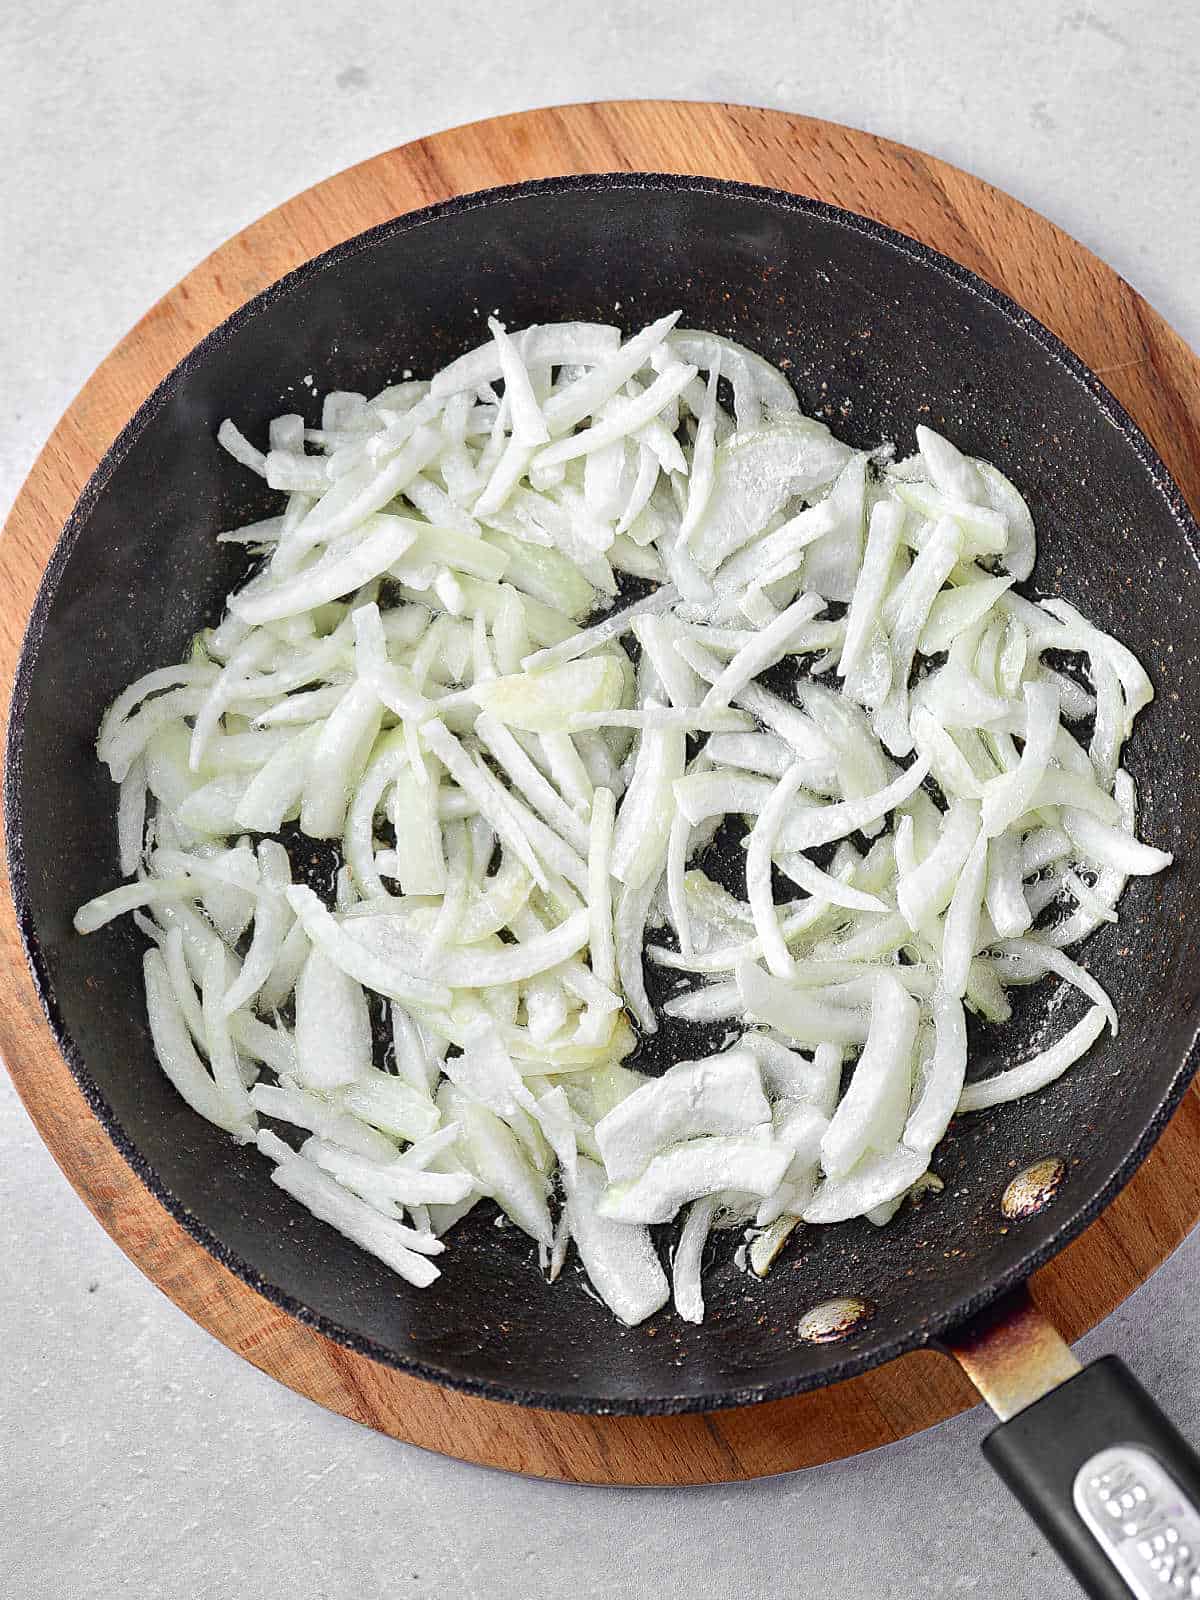 Sliced onions in a black skillet on a wooden board. Light grey surface. 